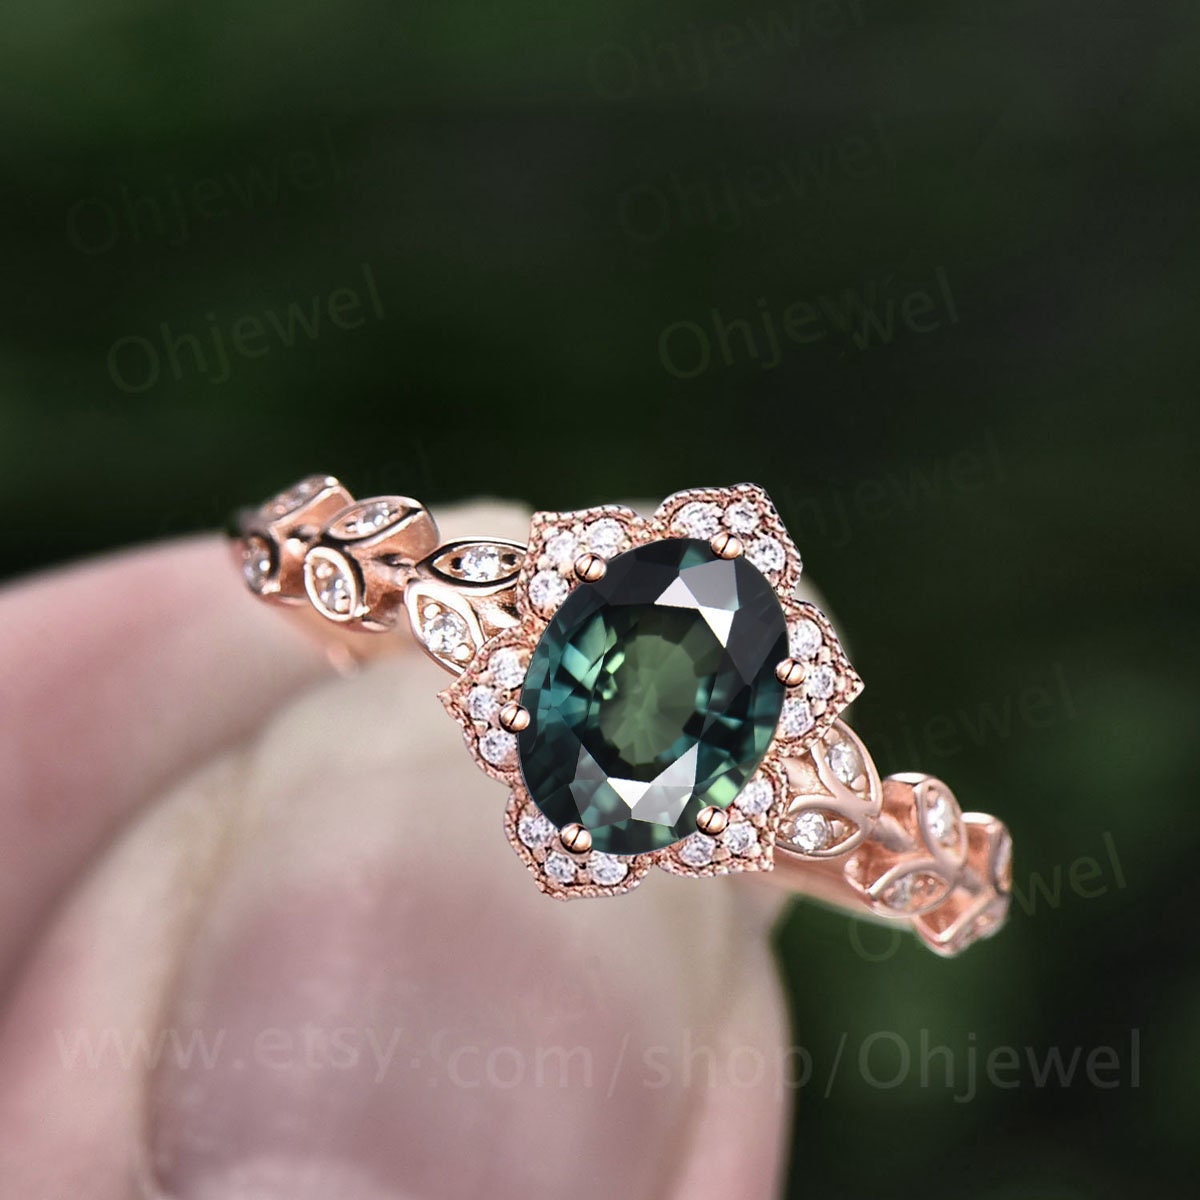 Vintage oval cut green teal sapphire engagement ring art deco flower leaf halo diamond ring 14k rose gold unique wedding promise ring women